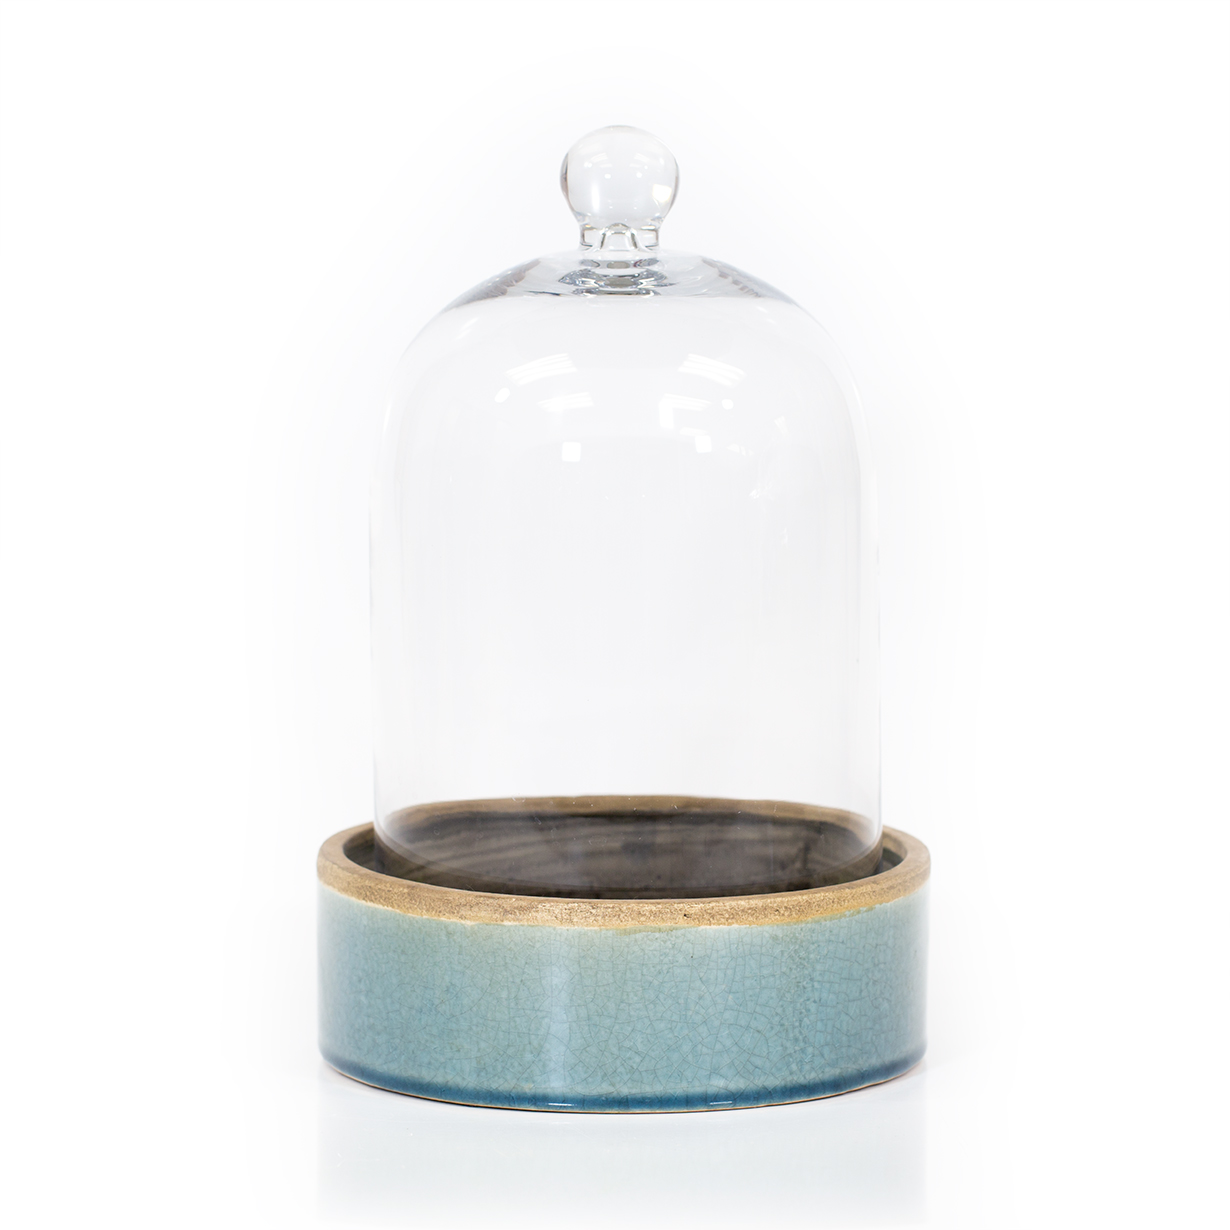 Ceramic Round Tray with Cloche (Teal Base, Small)